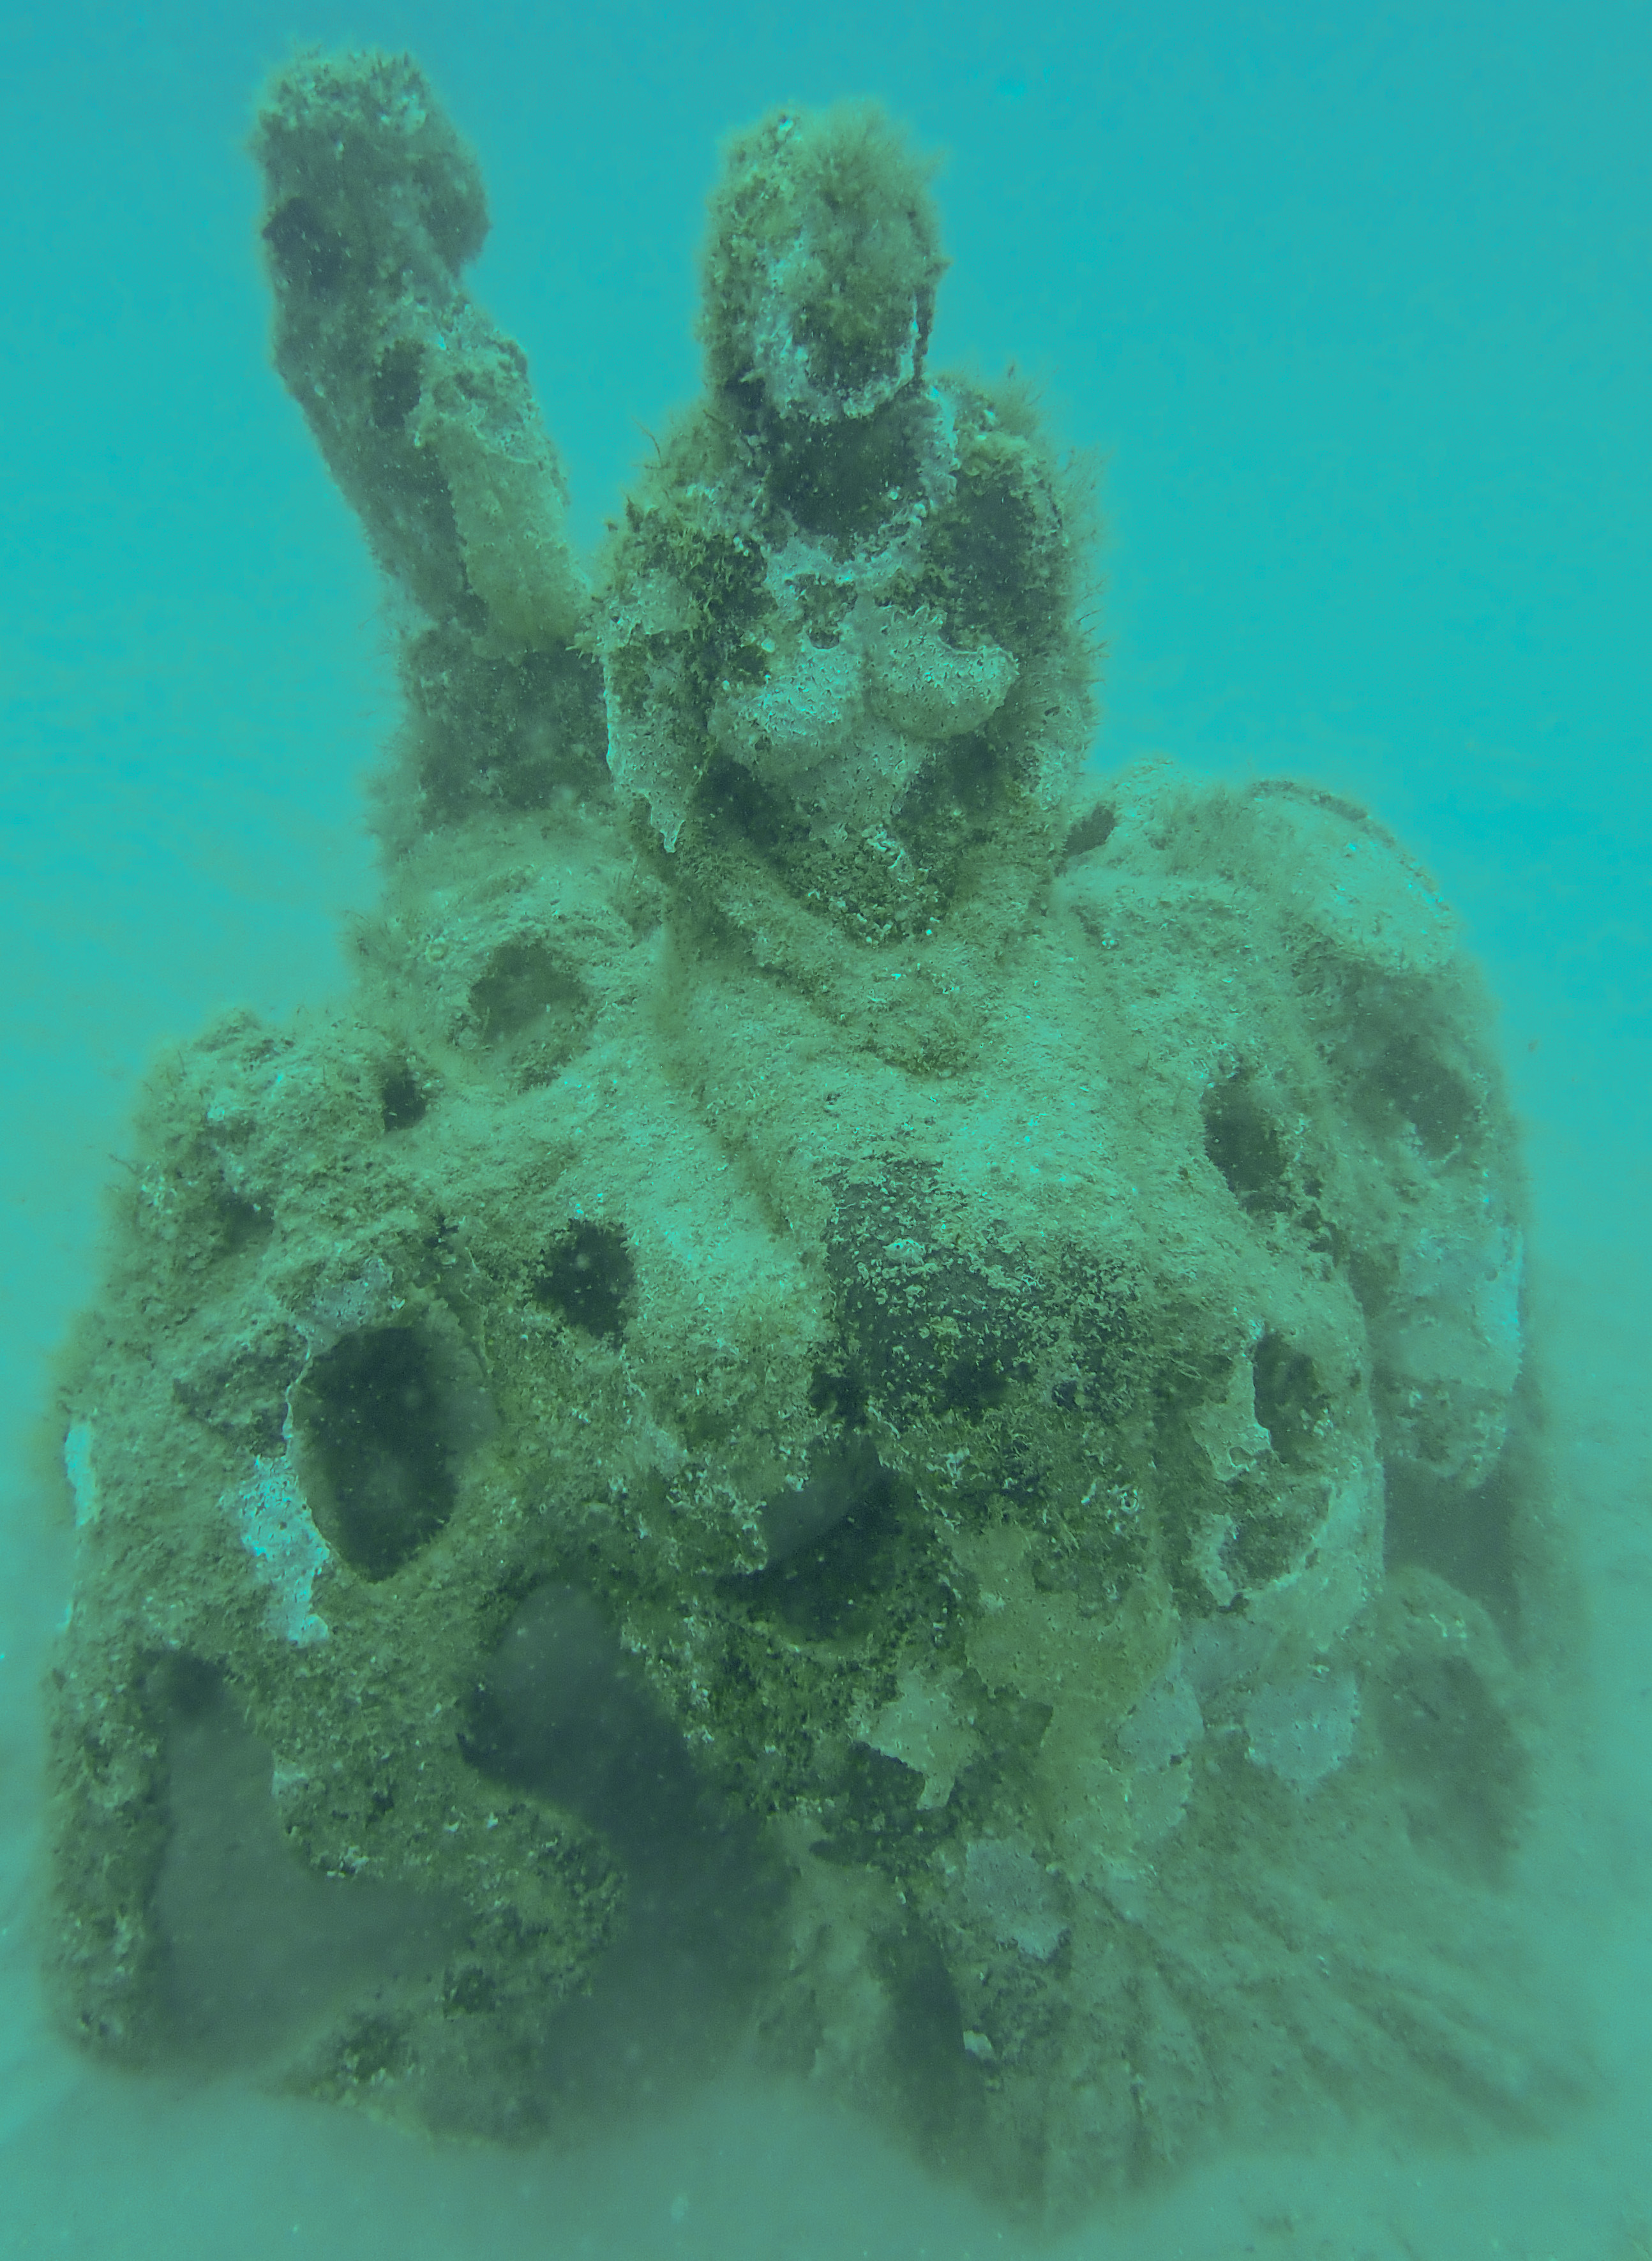 South Florida-Born 1000 Mermaids Artificial Reef Project Triples in Size Through Second Deployment in Palm Beach County